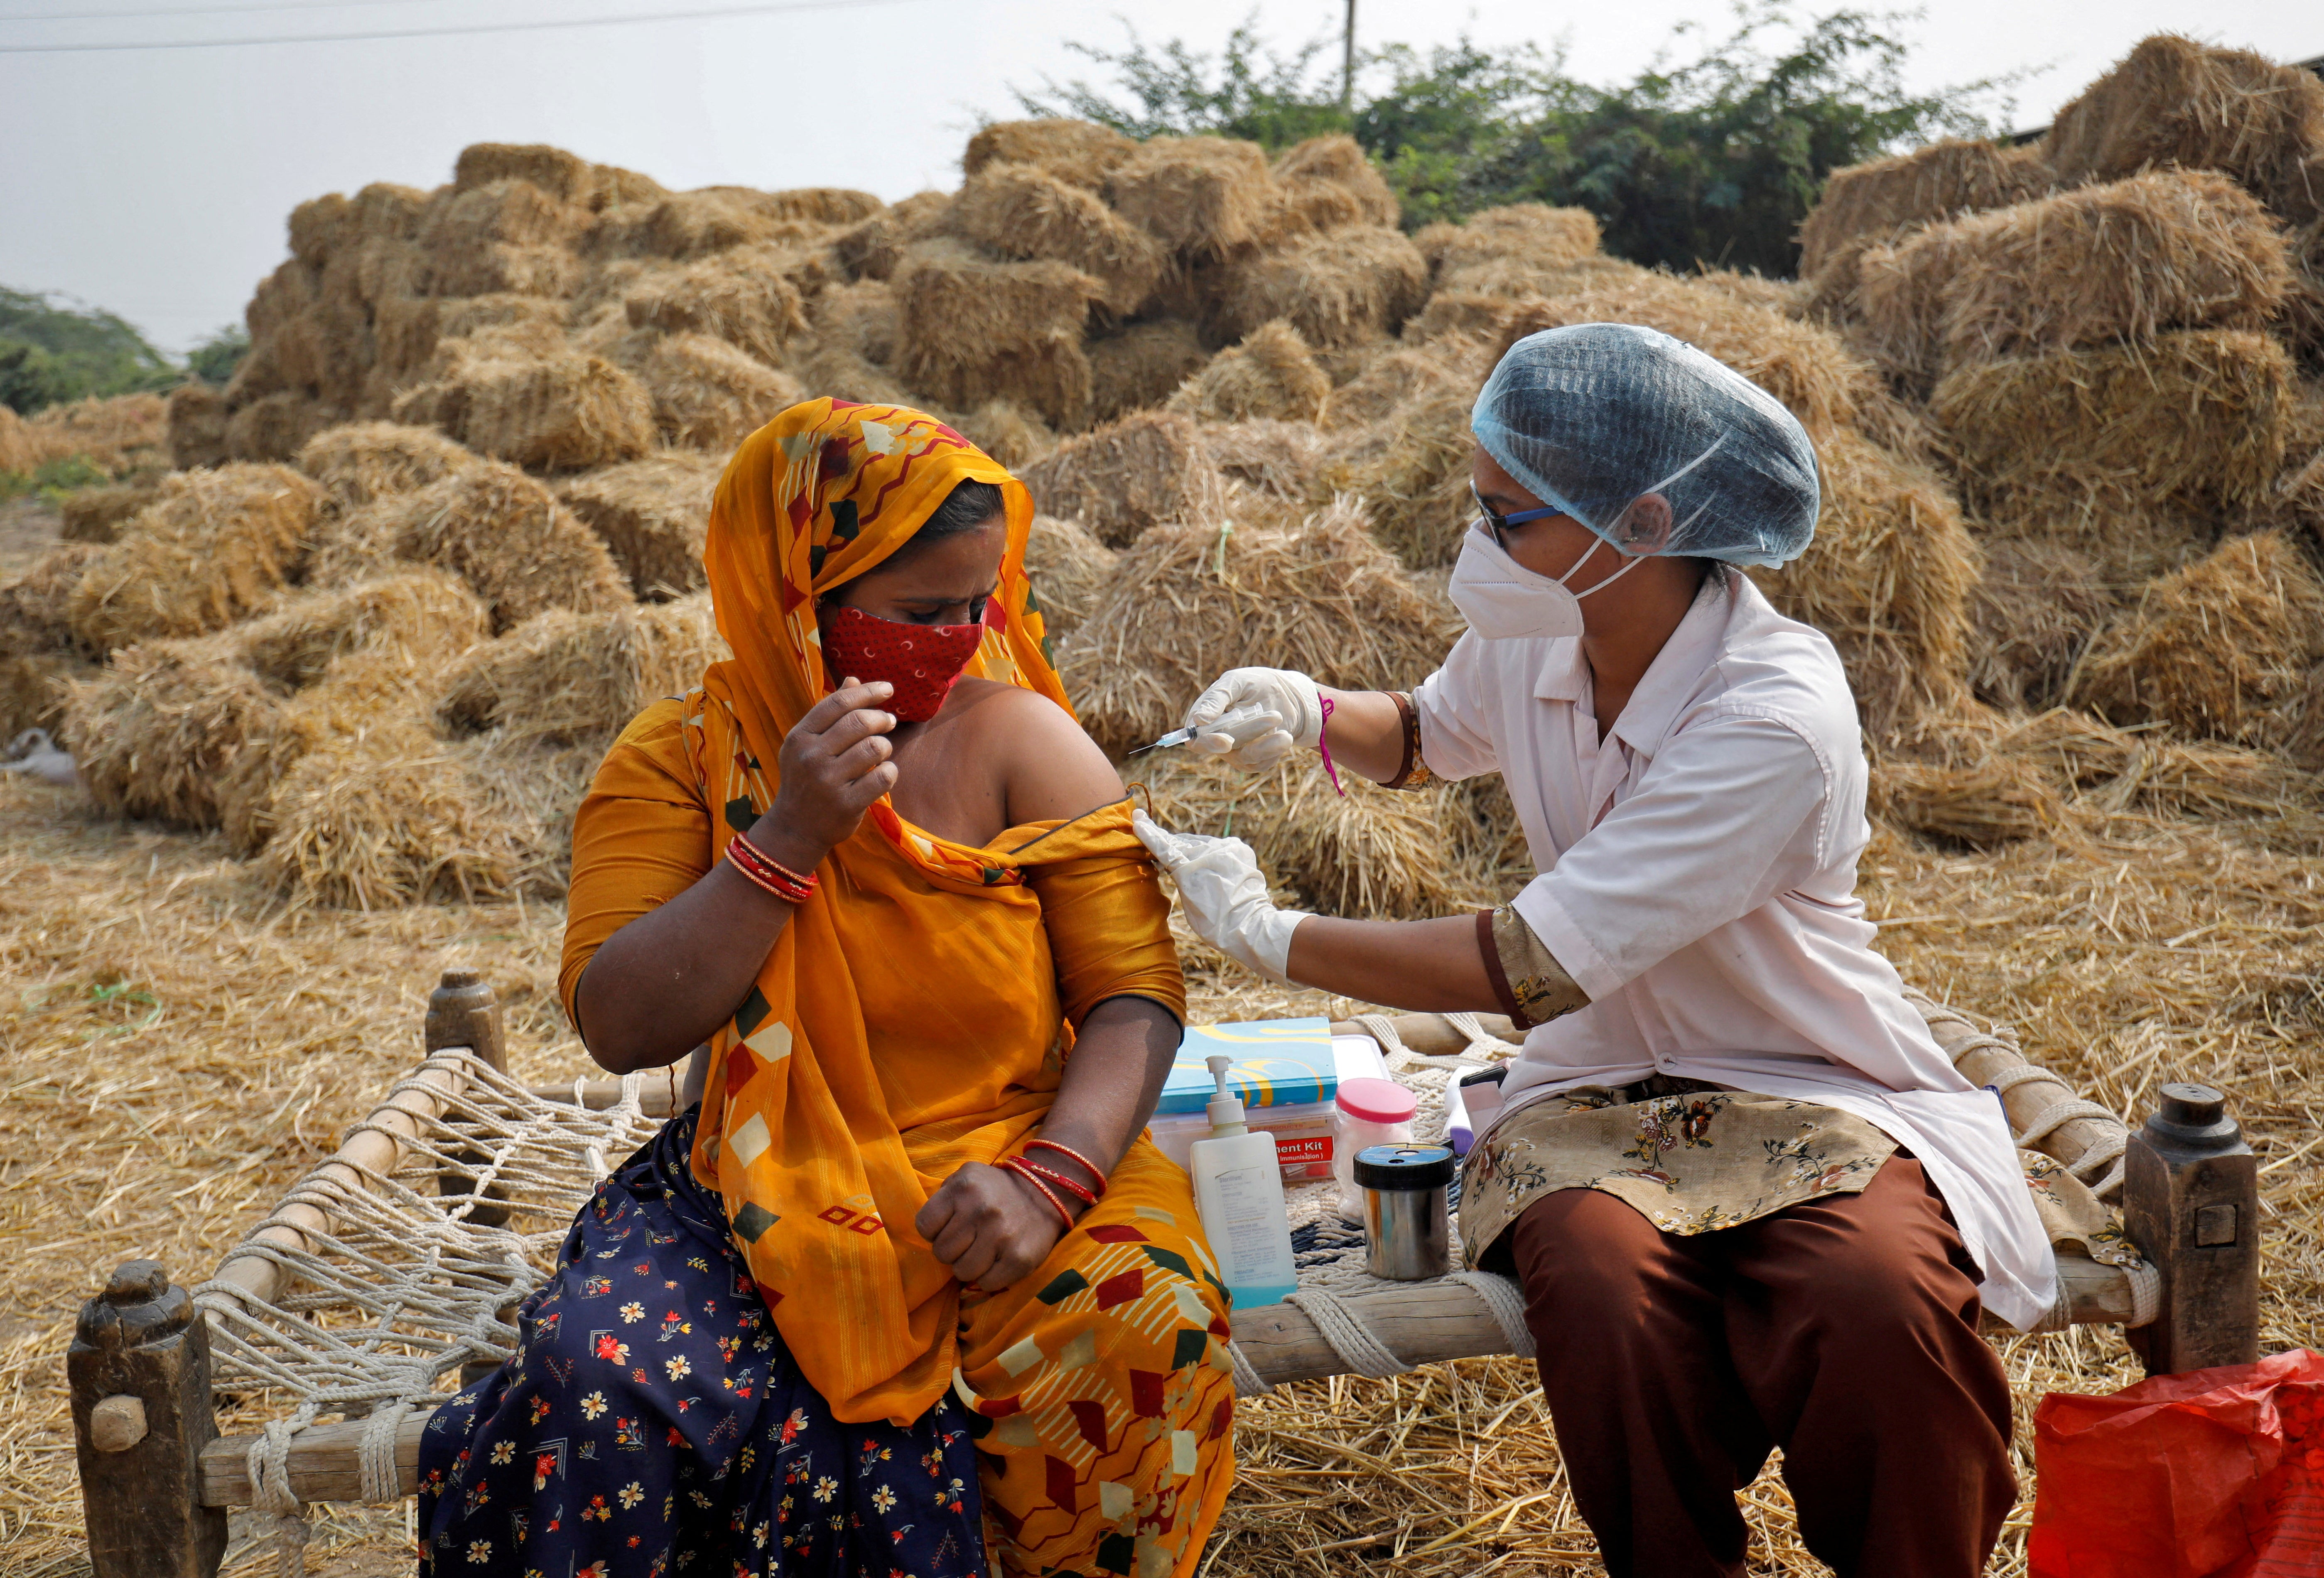 India has vaccinated 38 per cent of its population with two doses of vaccines